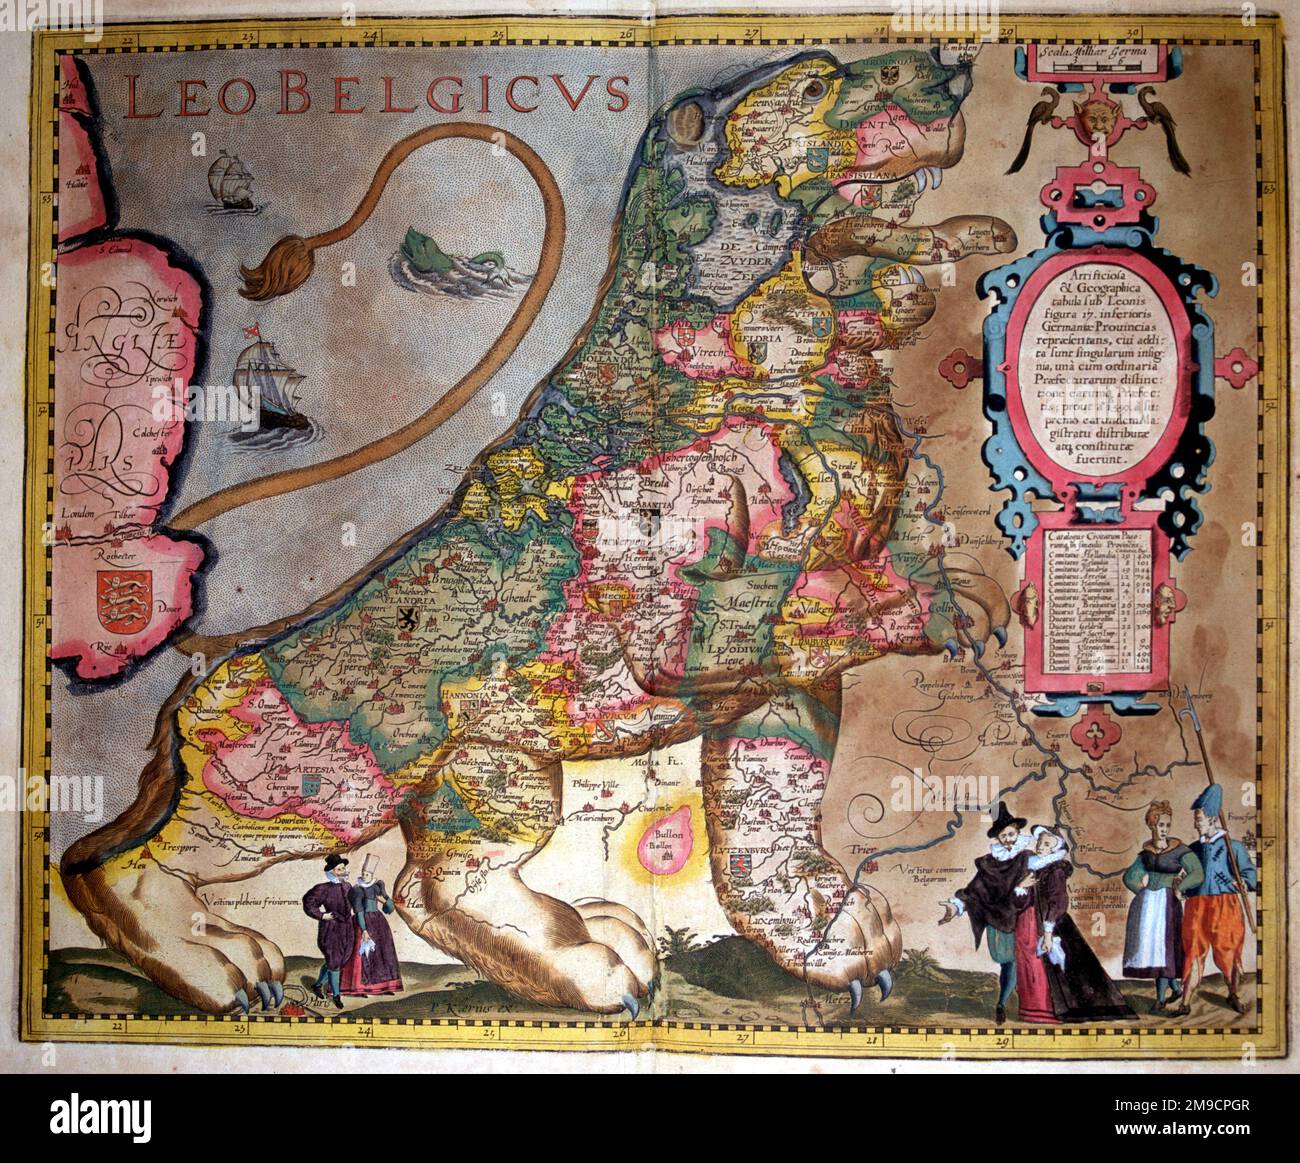 Leo Belgicus showing the Low Countries of Netherlands, Belgium and Luxembourg as a Lion during the Eighty Years War of Independence Stock Photo